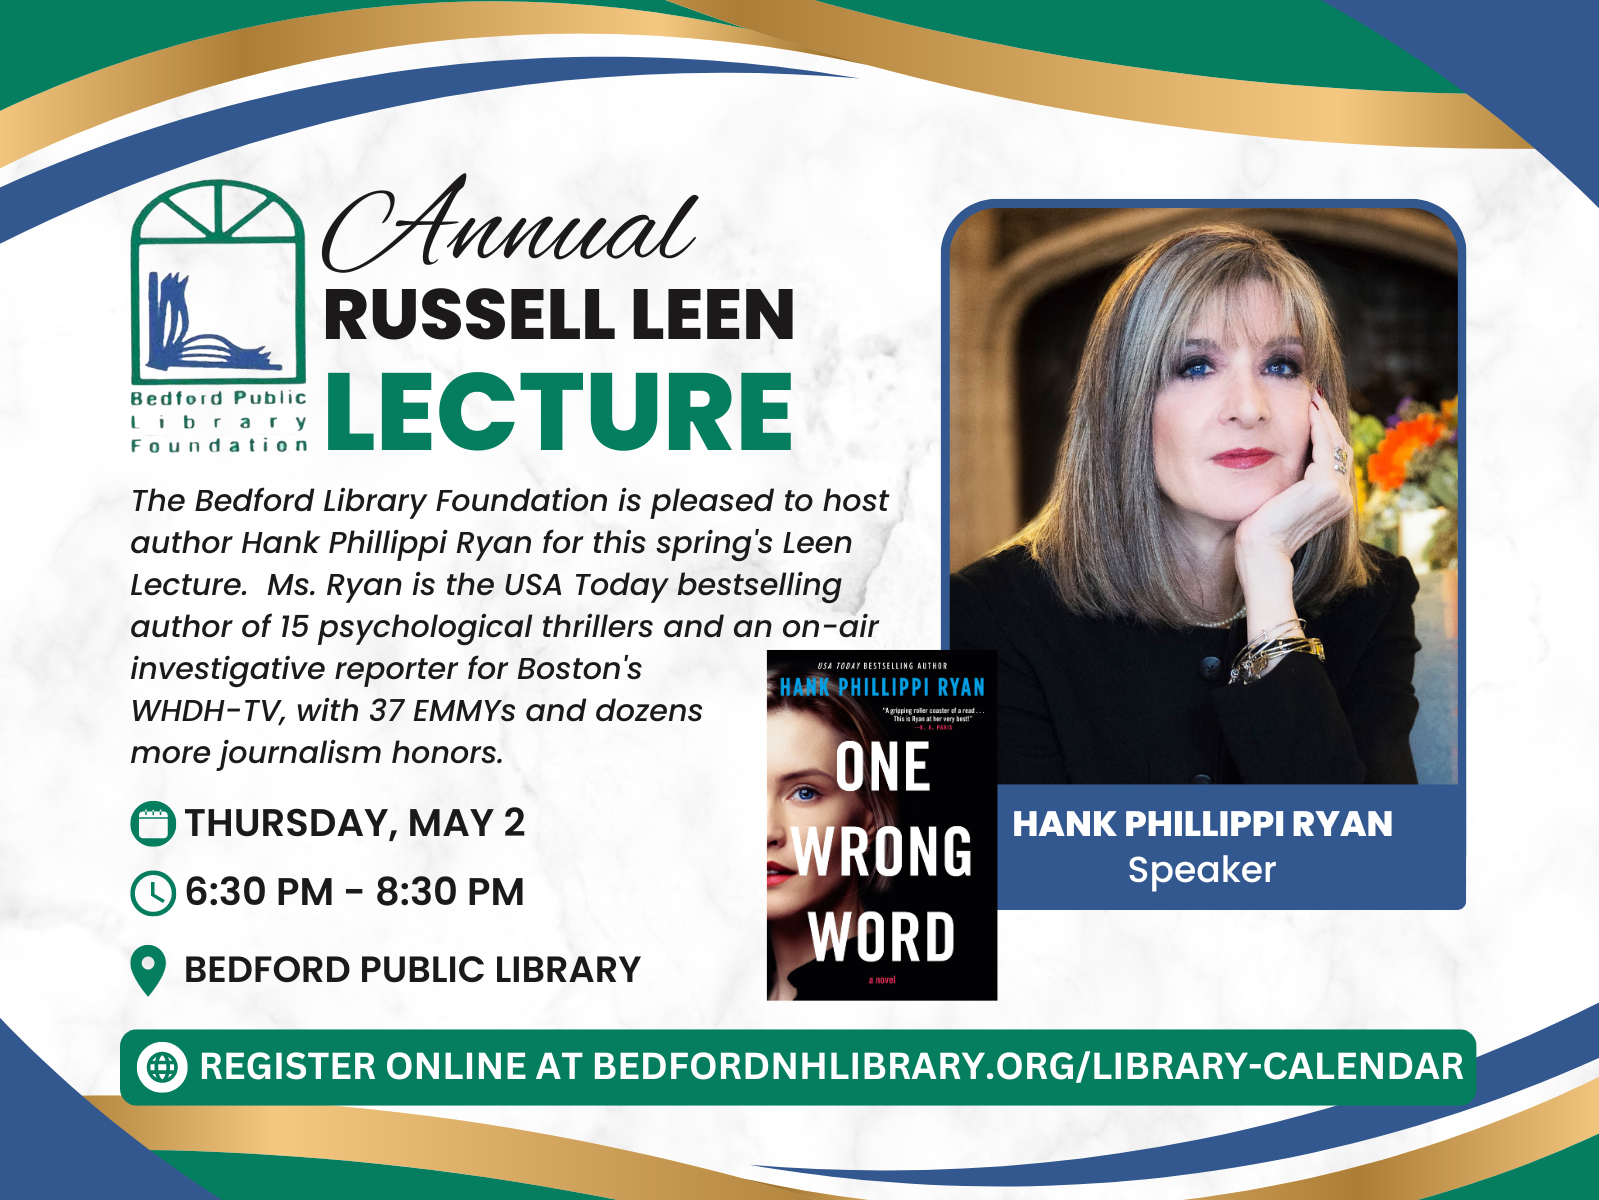 Annual Leen Lecture with Hank Phillippi Ryan